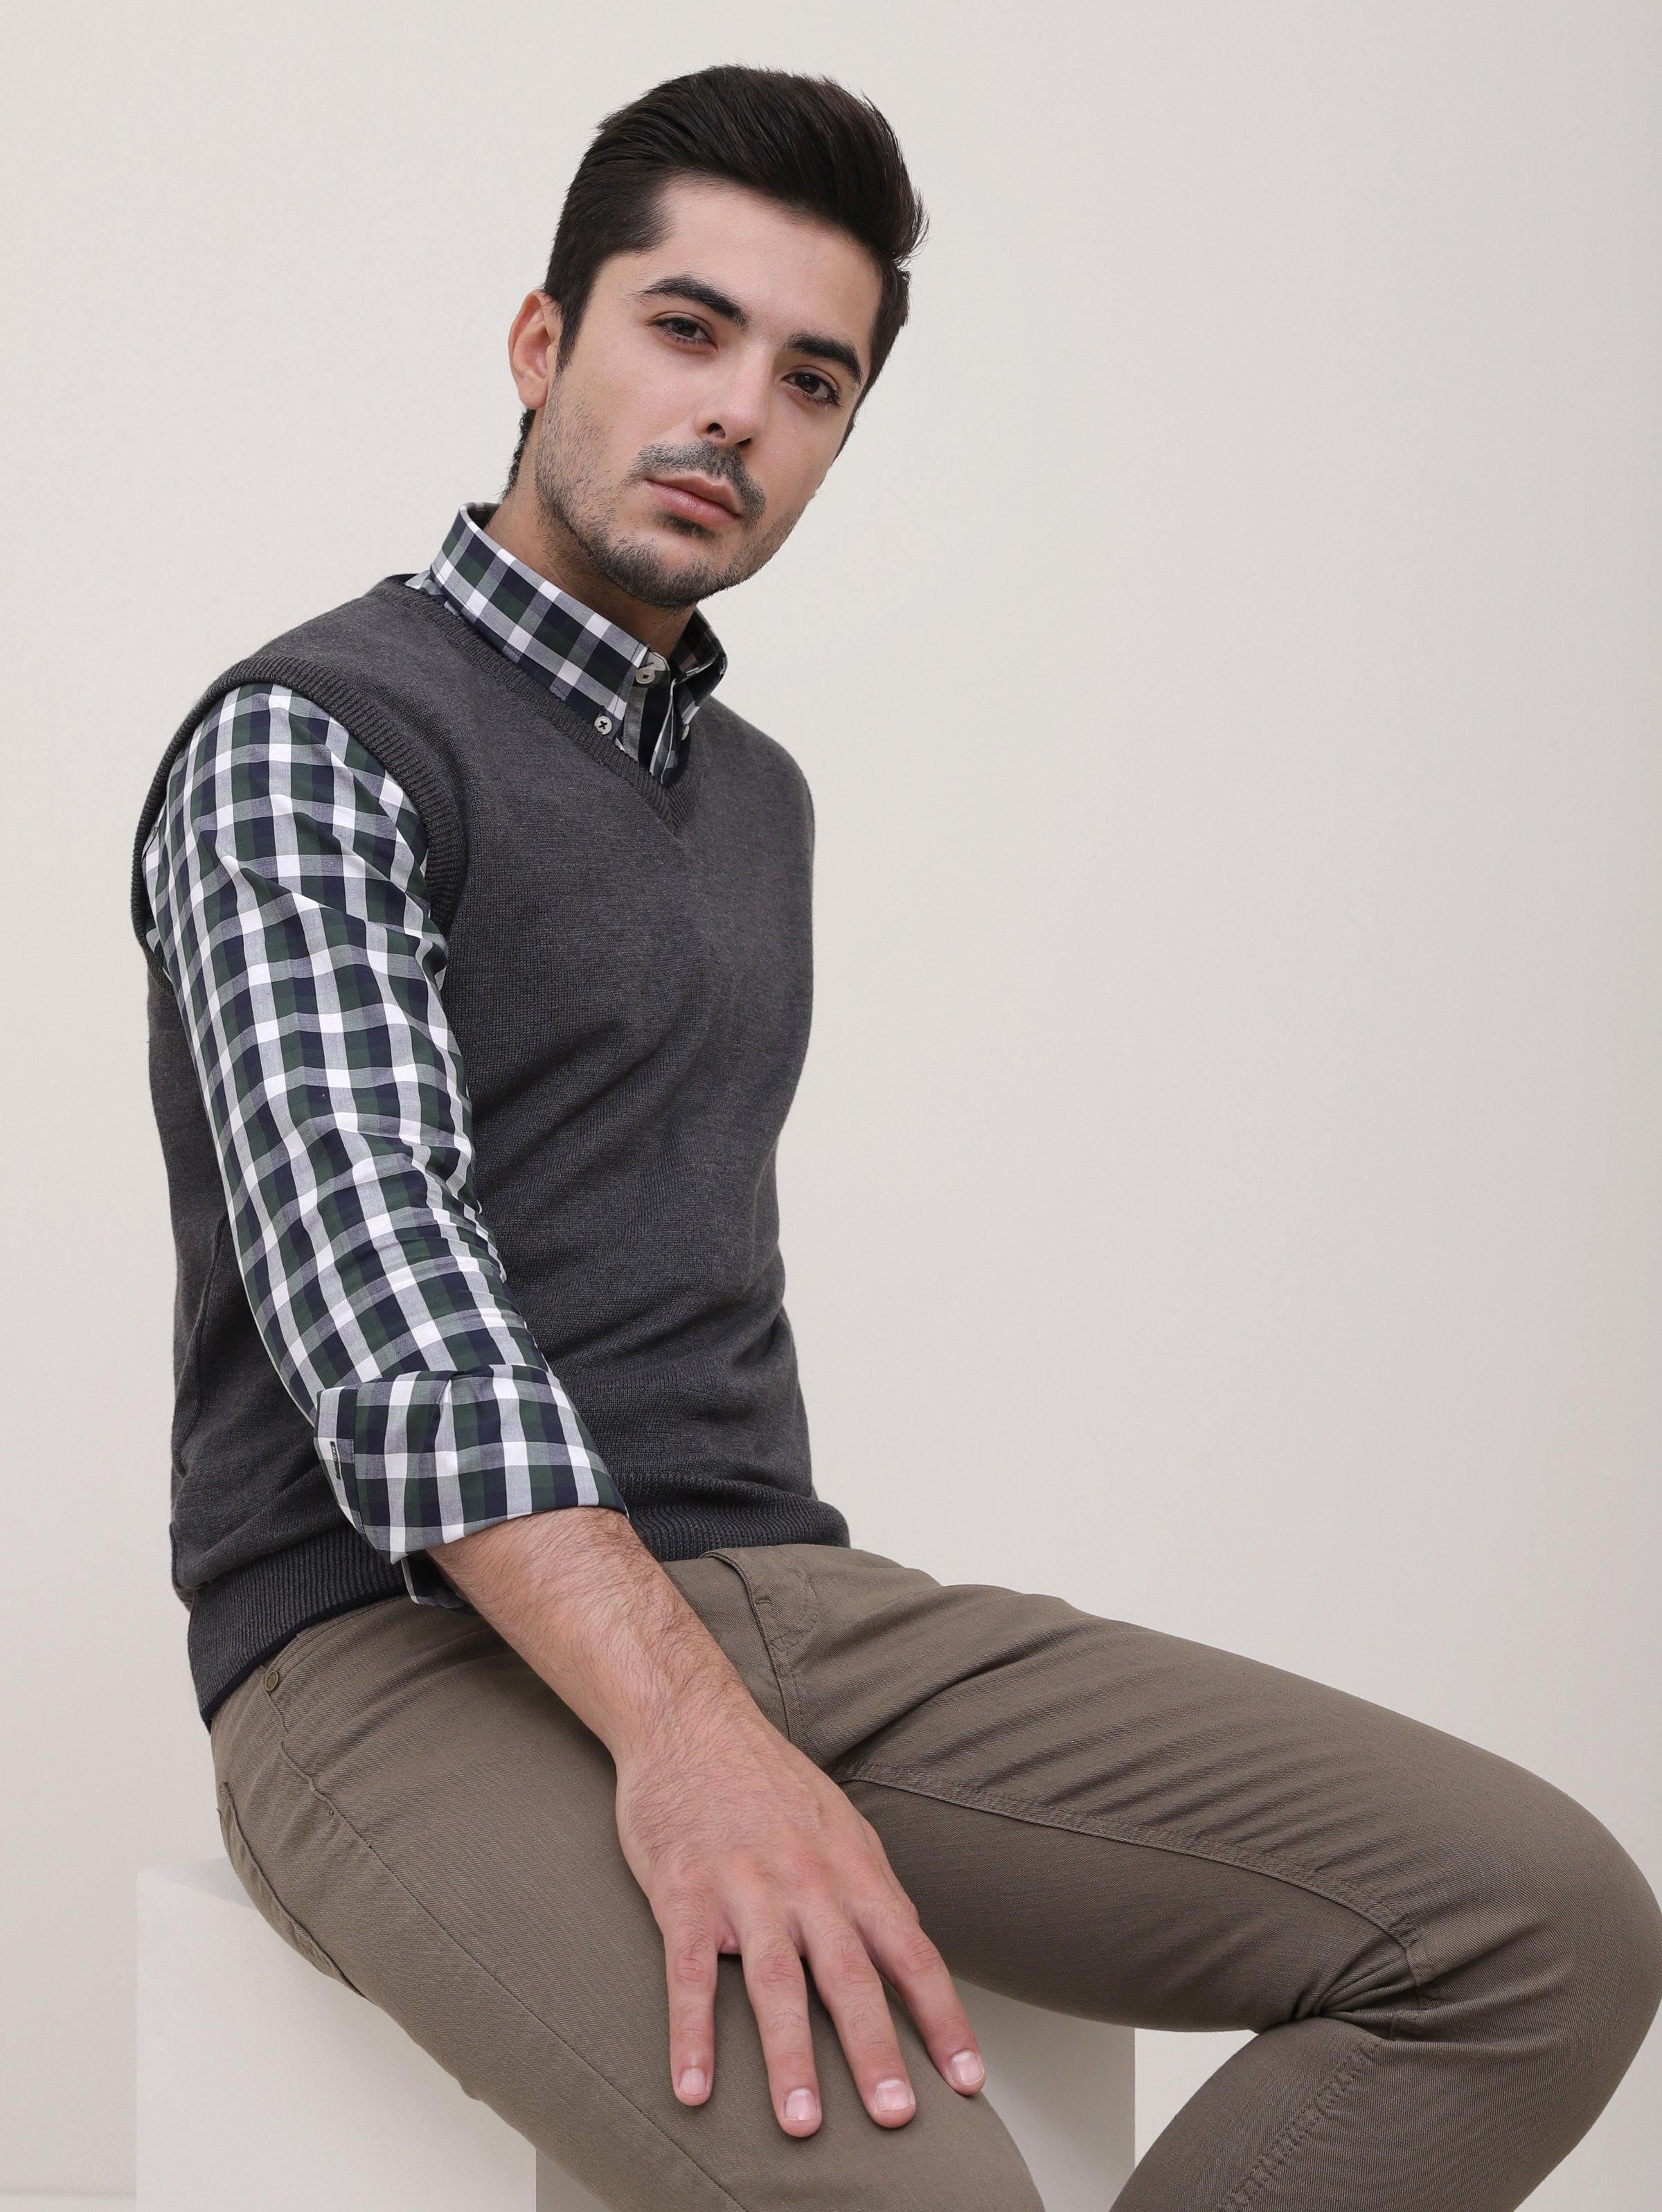 SWEATER V NECK SLEEVELESS CHARCOAL at Charcoal Clothing